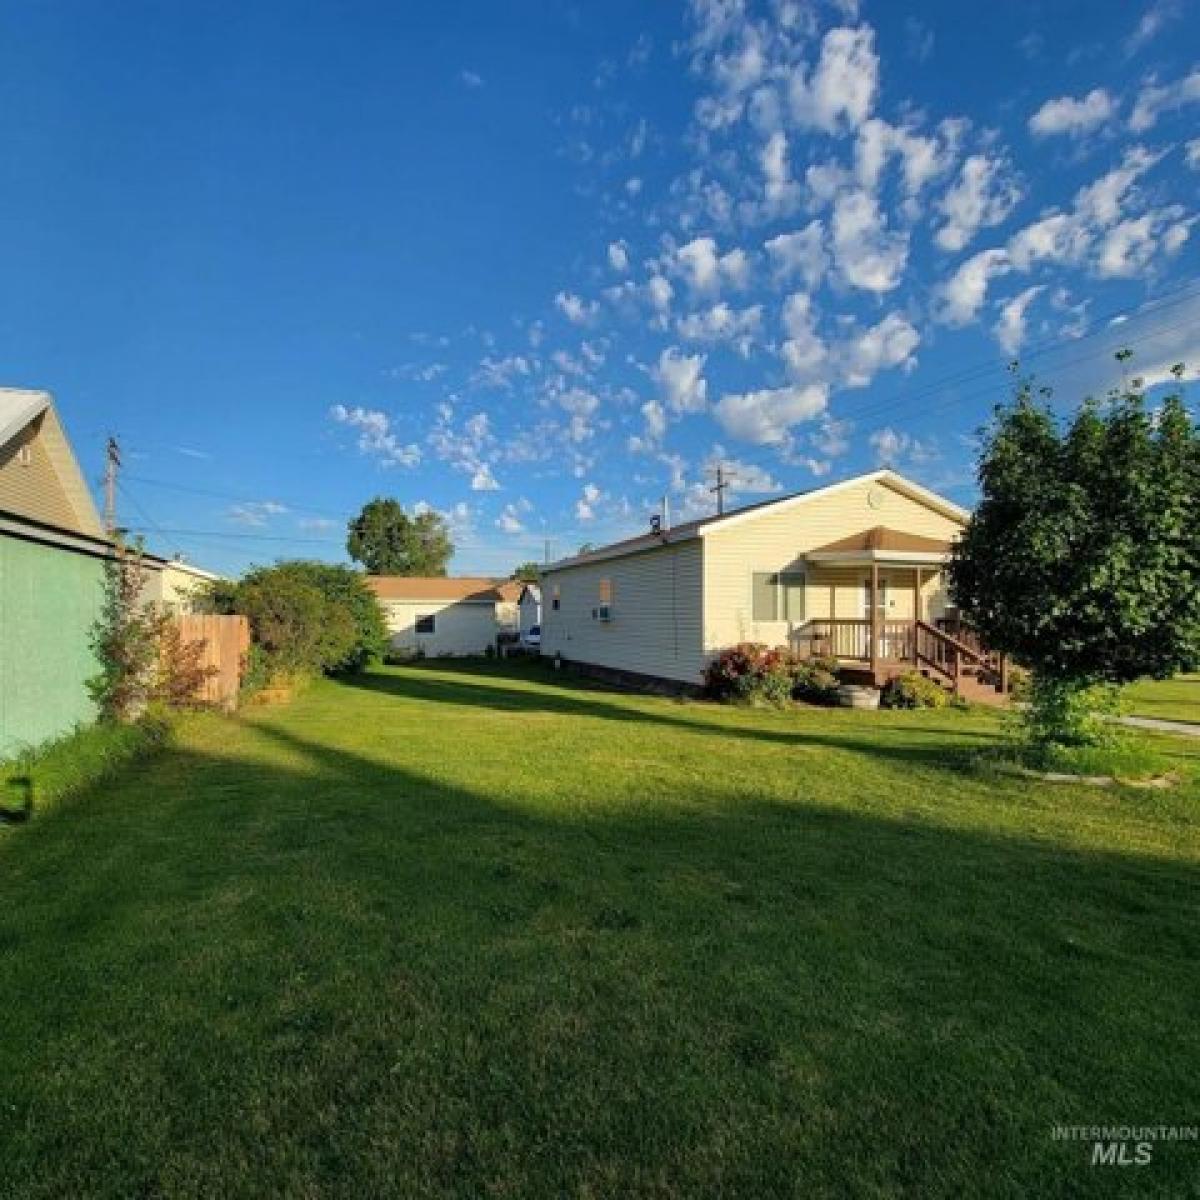 Picture of Home For Sale in Gooding, Idaho, United States